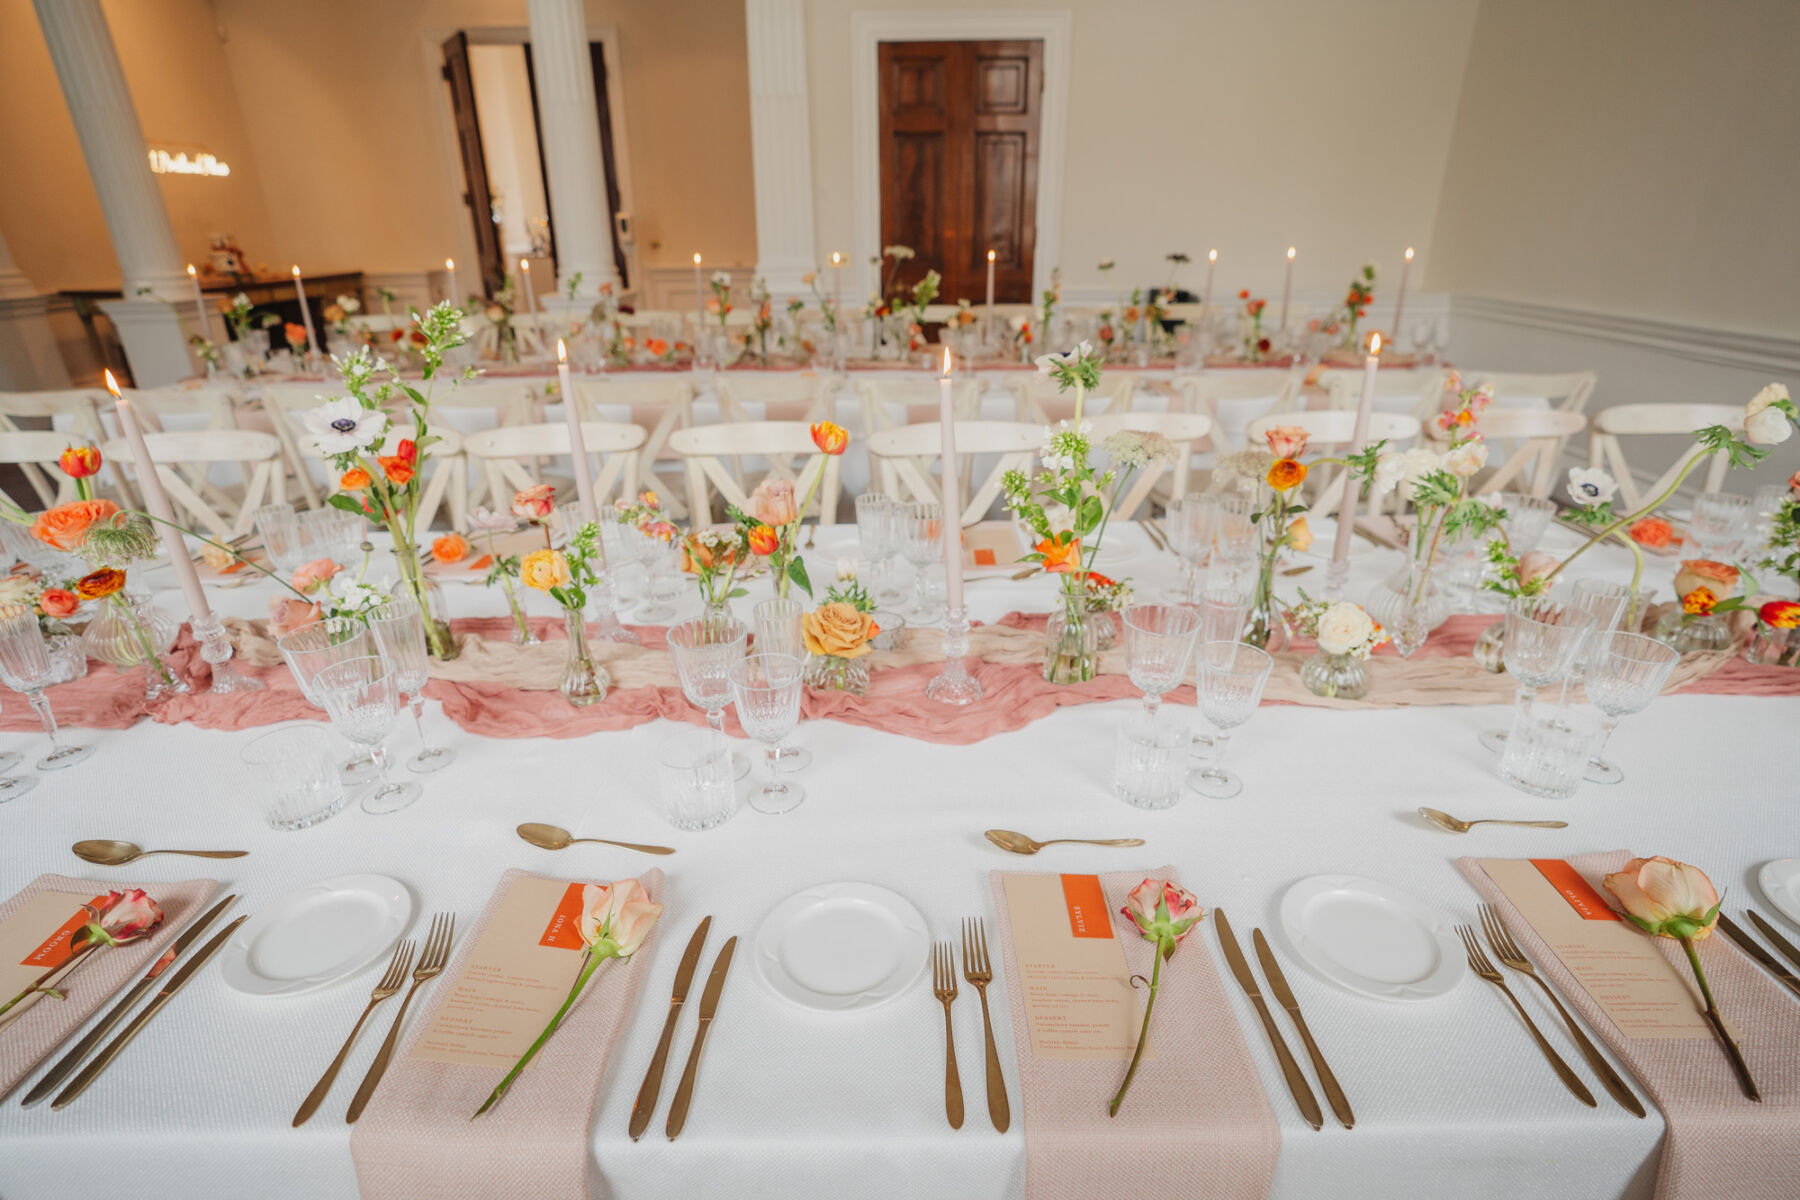 Wedding reception setup on long tables with white linen, cream taper candles and orange wedding flowers and menus. A single stem rose decorates each setting.